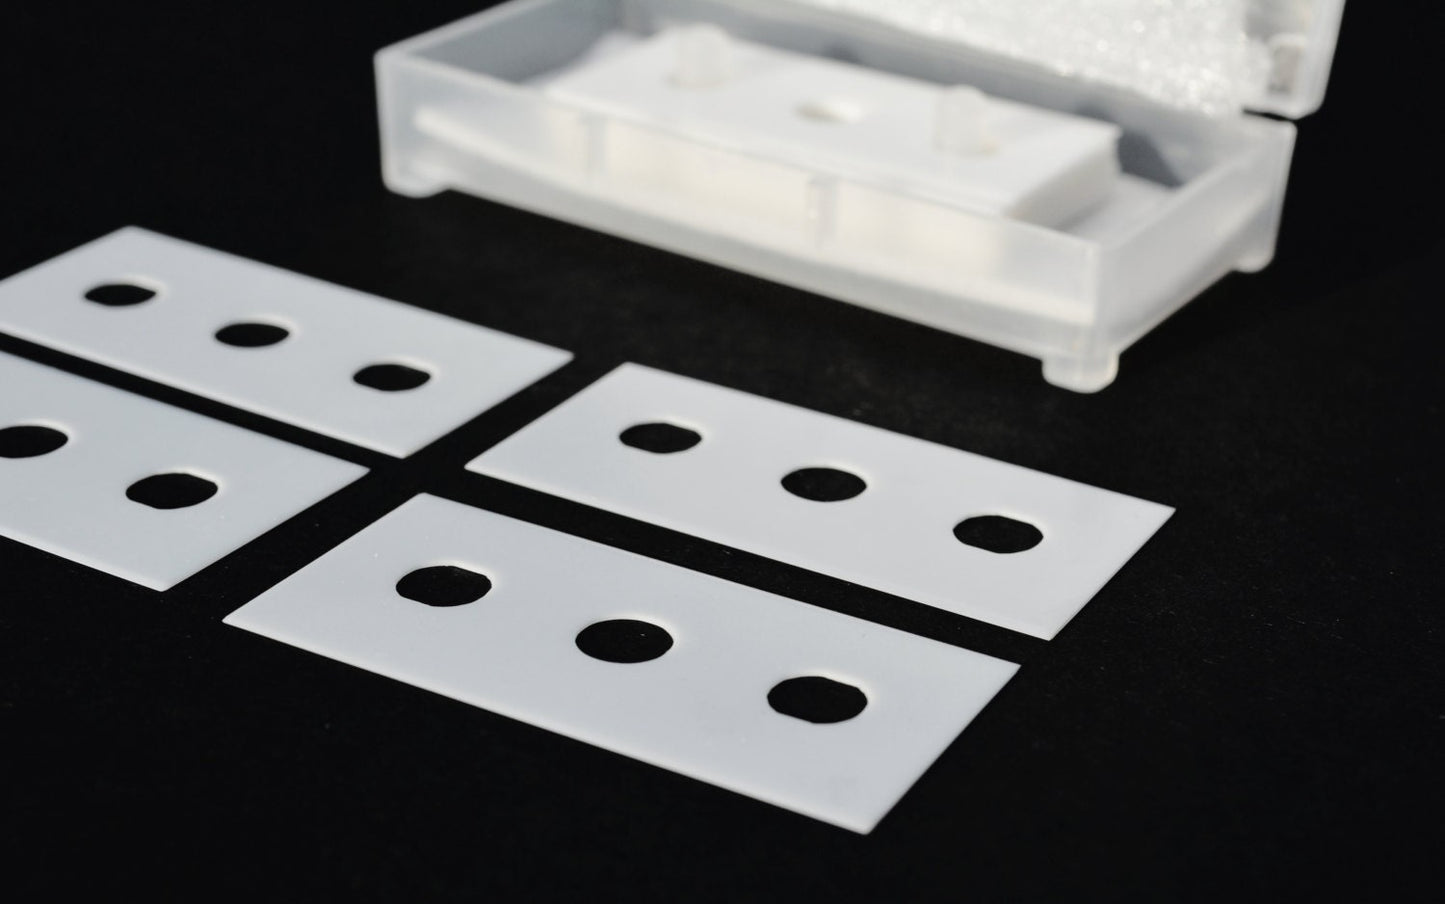 43mm x 22mm CERAMIC 3-hole Slitter Blade (.3mm thick) “3-hole slitters” - double edged